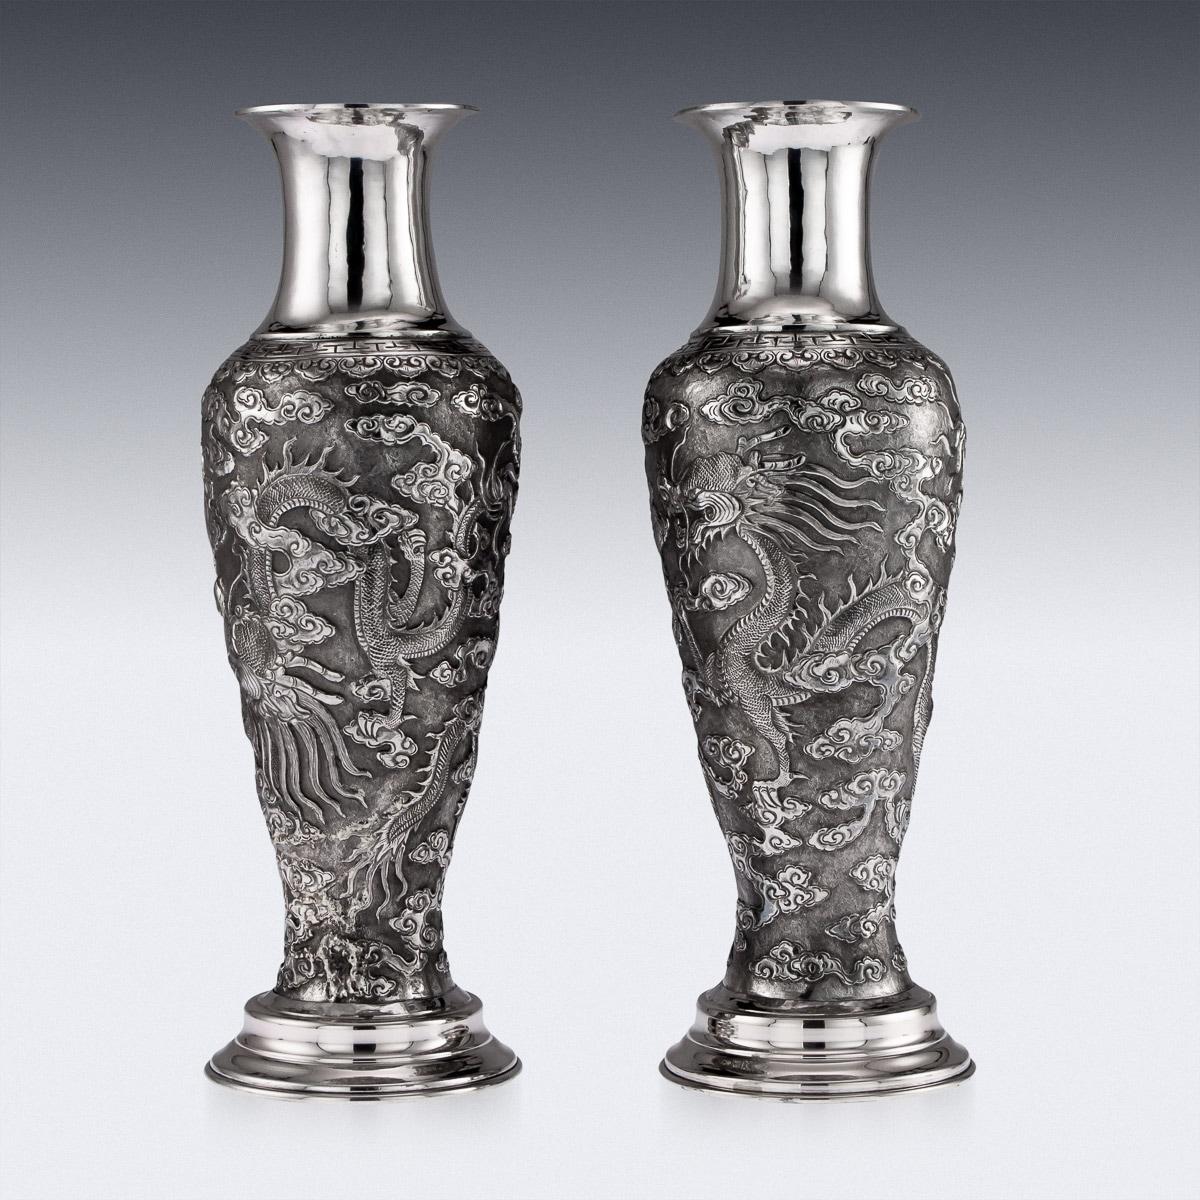 Antique 19th century rare Chinese export solid silver pair of large vases, impressive and exceptionally fine, decorated with repoussé flying dragons amongst clouds on a matted ground, the centre of the vase bearing the Chinese symbol of longevity,